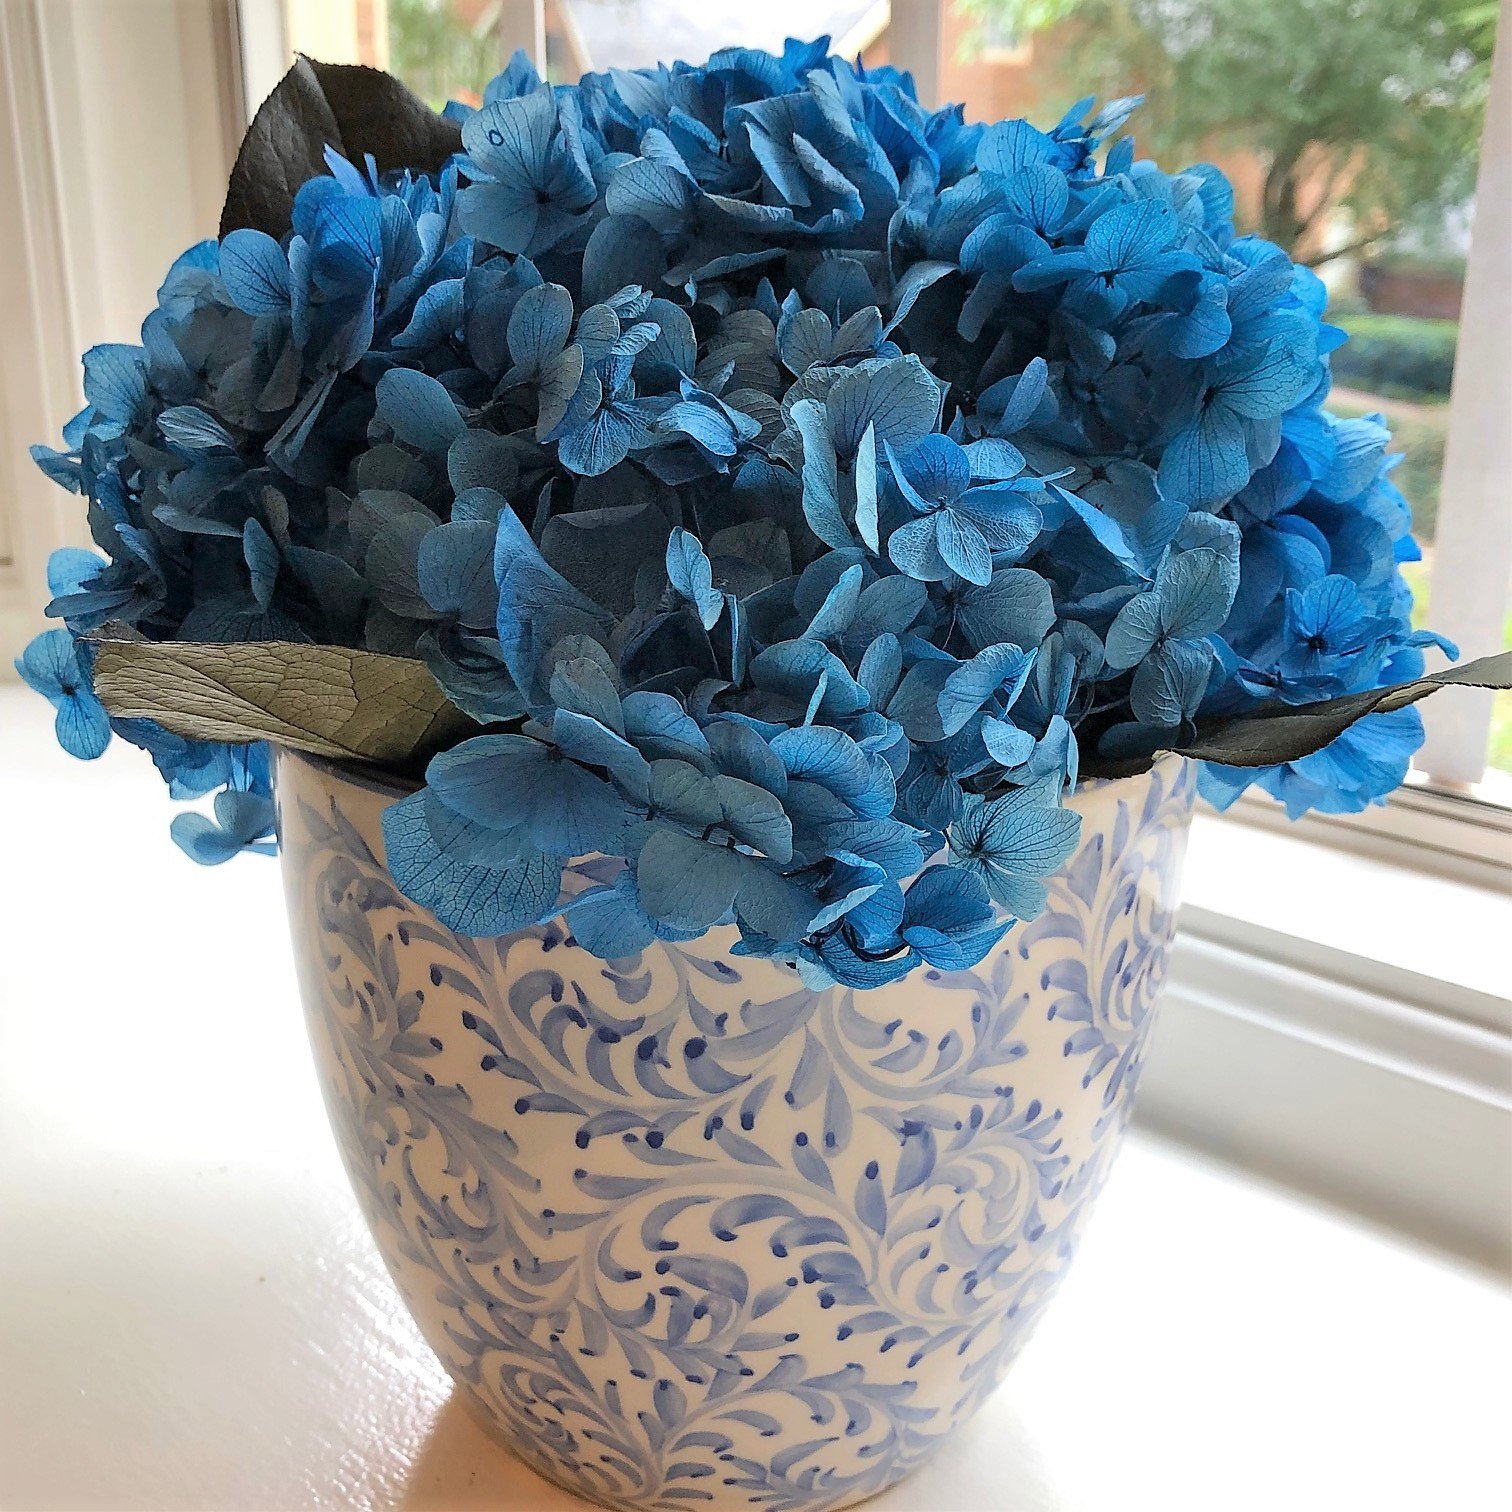 128 Blue hydrangea preserved in Blue and White vase